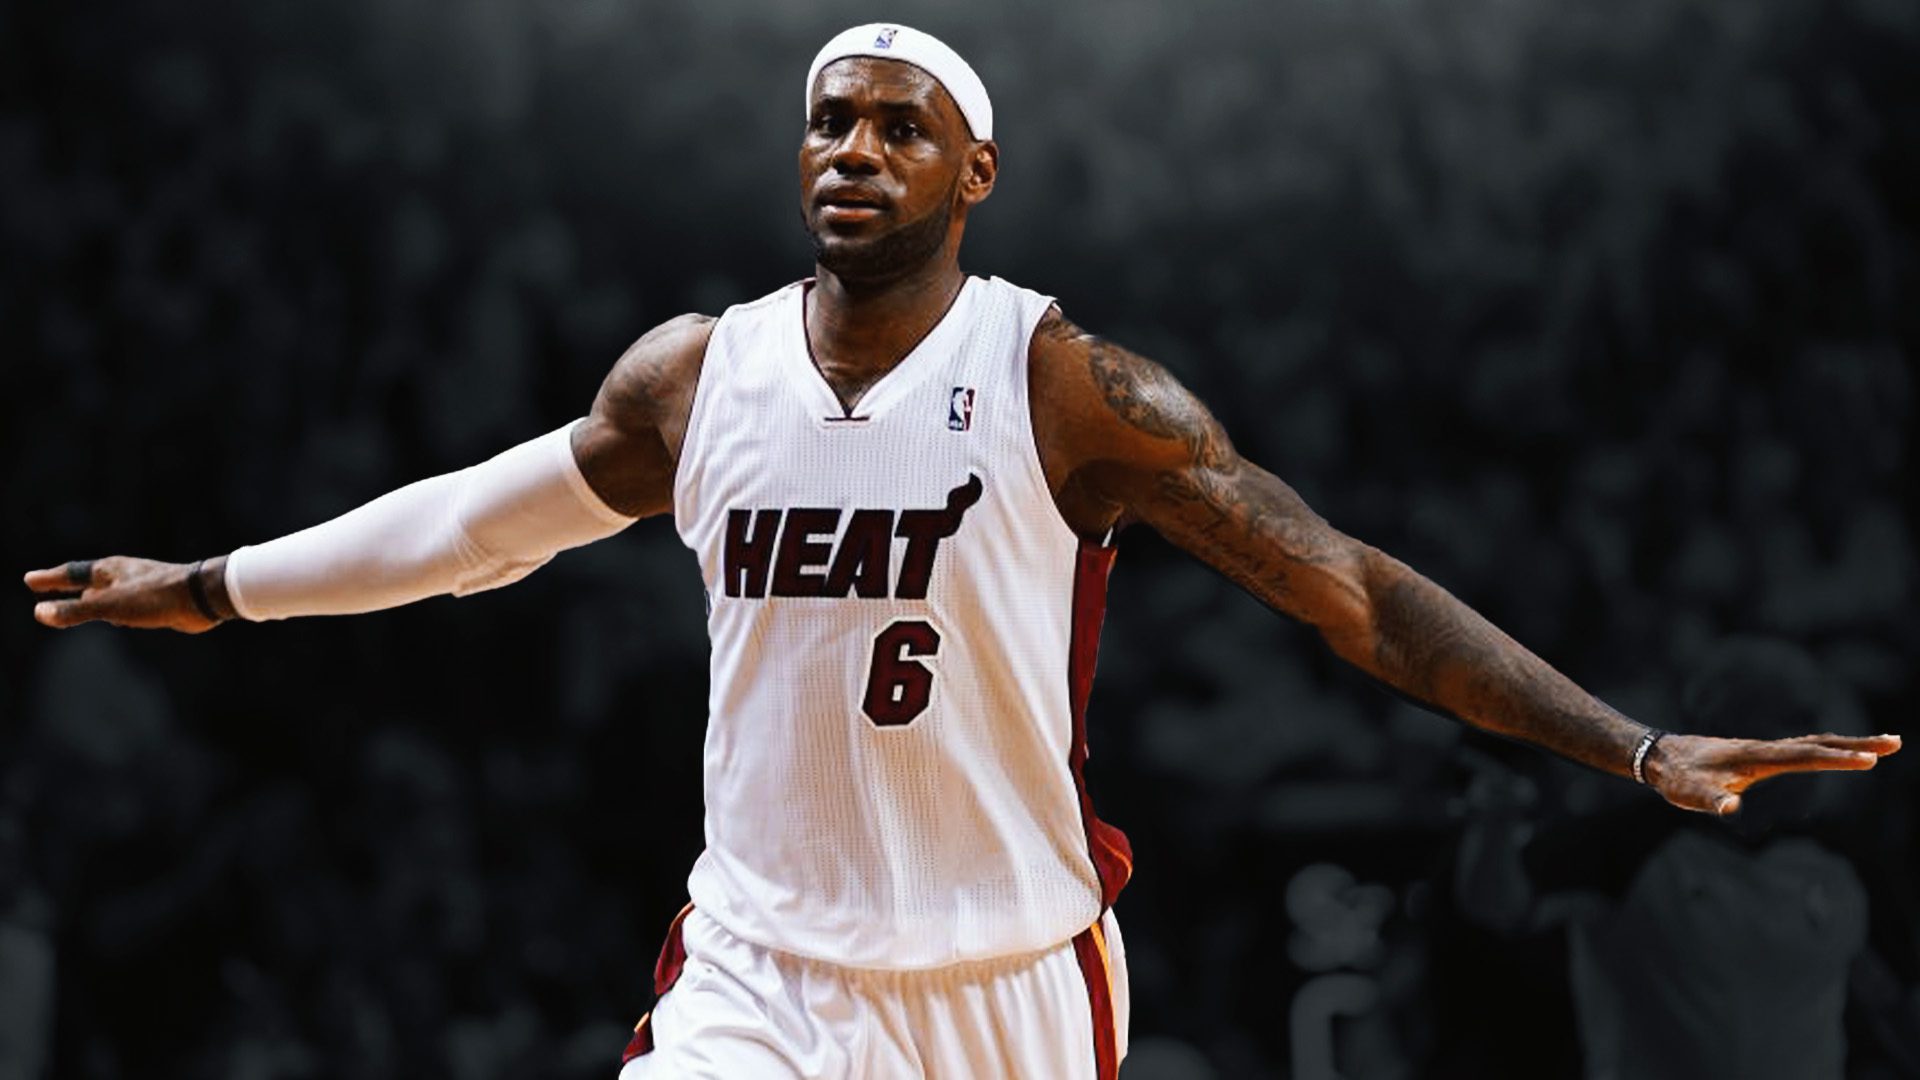 Udonis Haslem Tells Hilarious Story About LeBron James Going Beast Mode